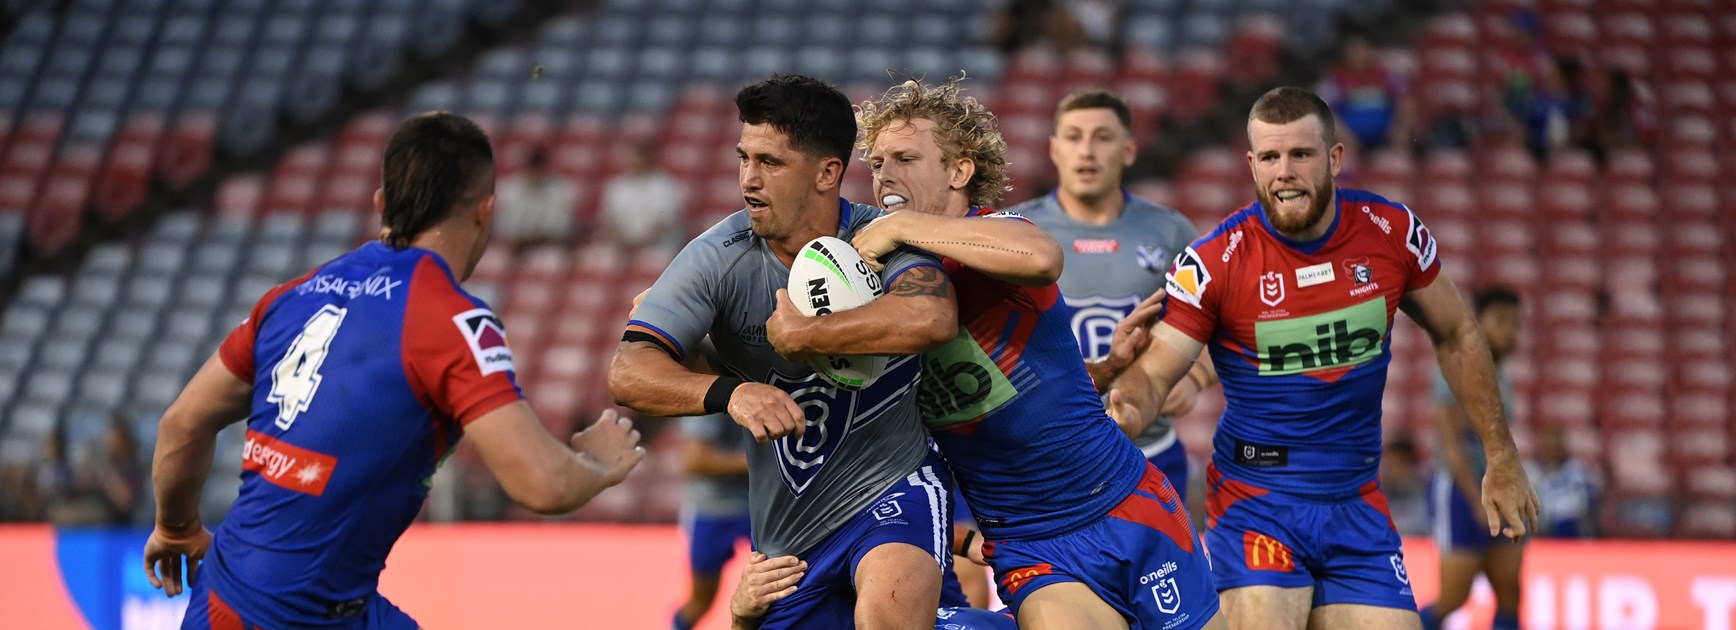 Bulldogs secure draw after Knights fire early